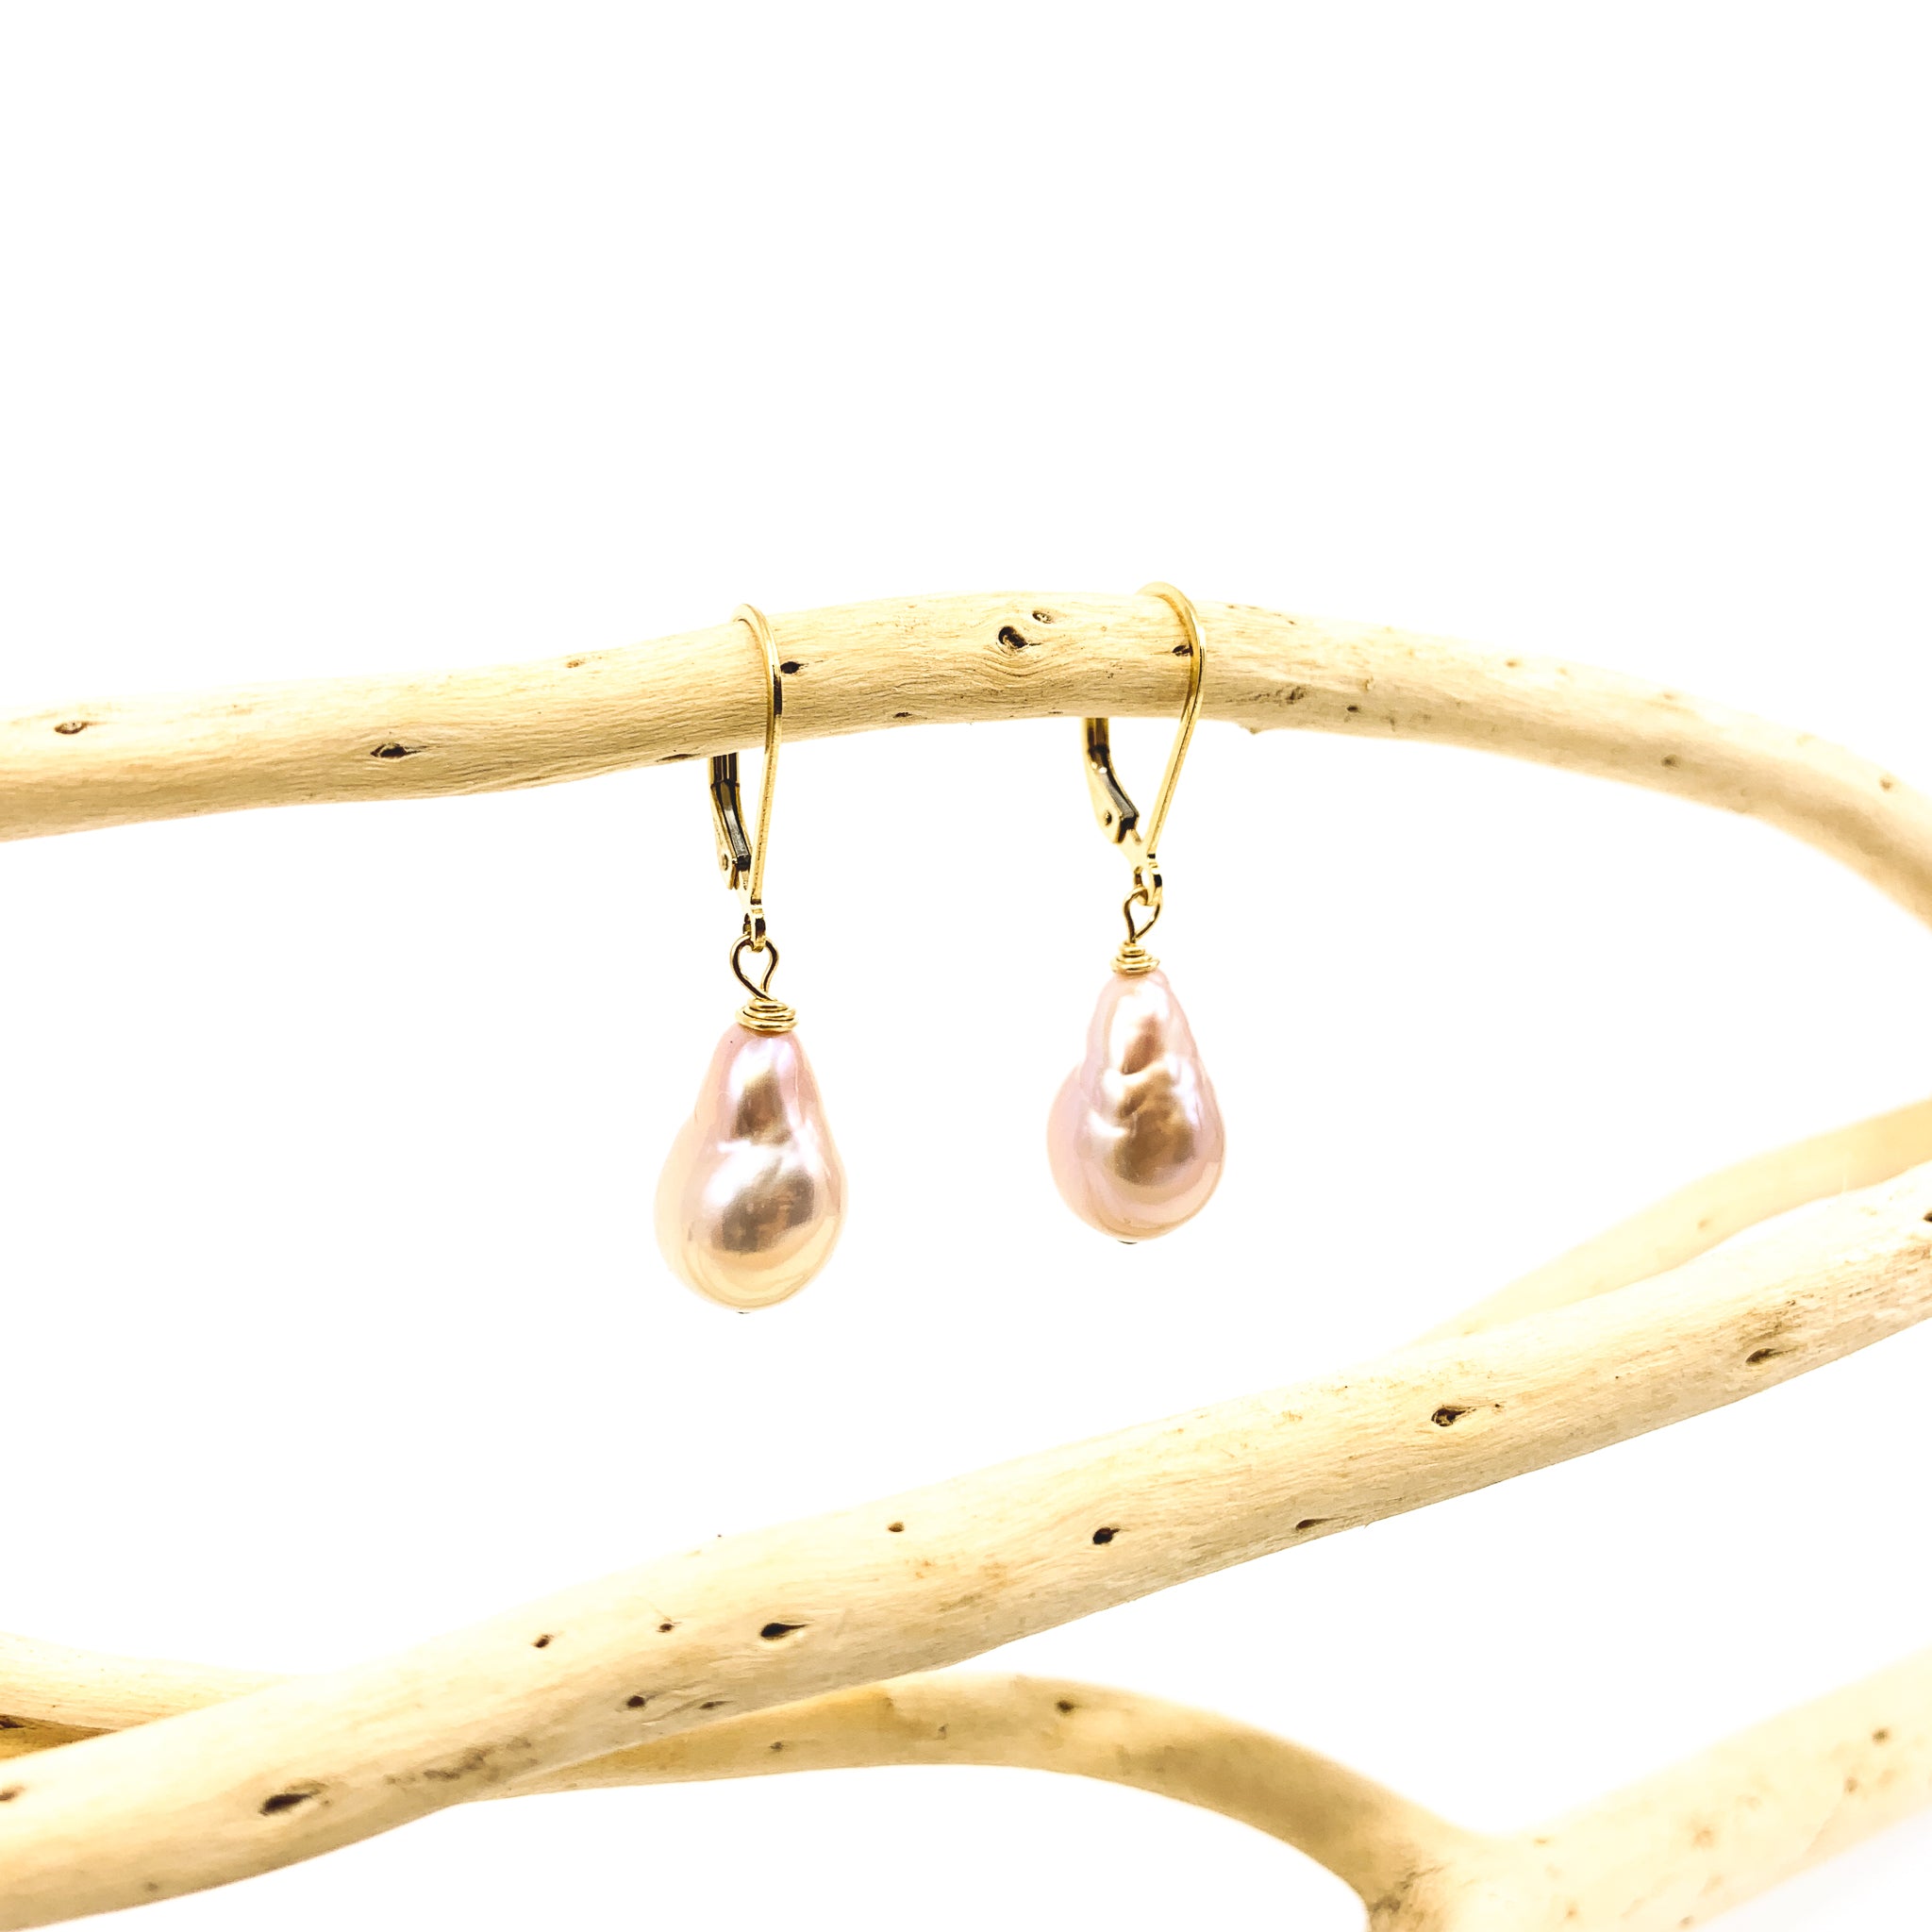 natural pink baroque pearl earrings with safety ear wires by eve black jewelry made in hawaii